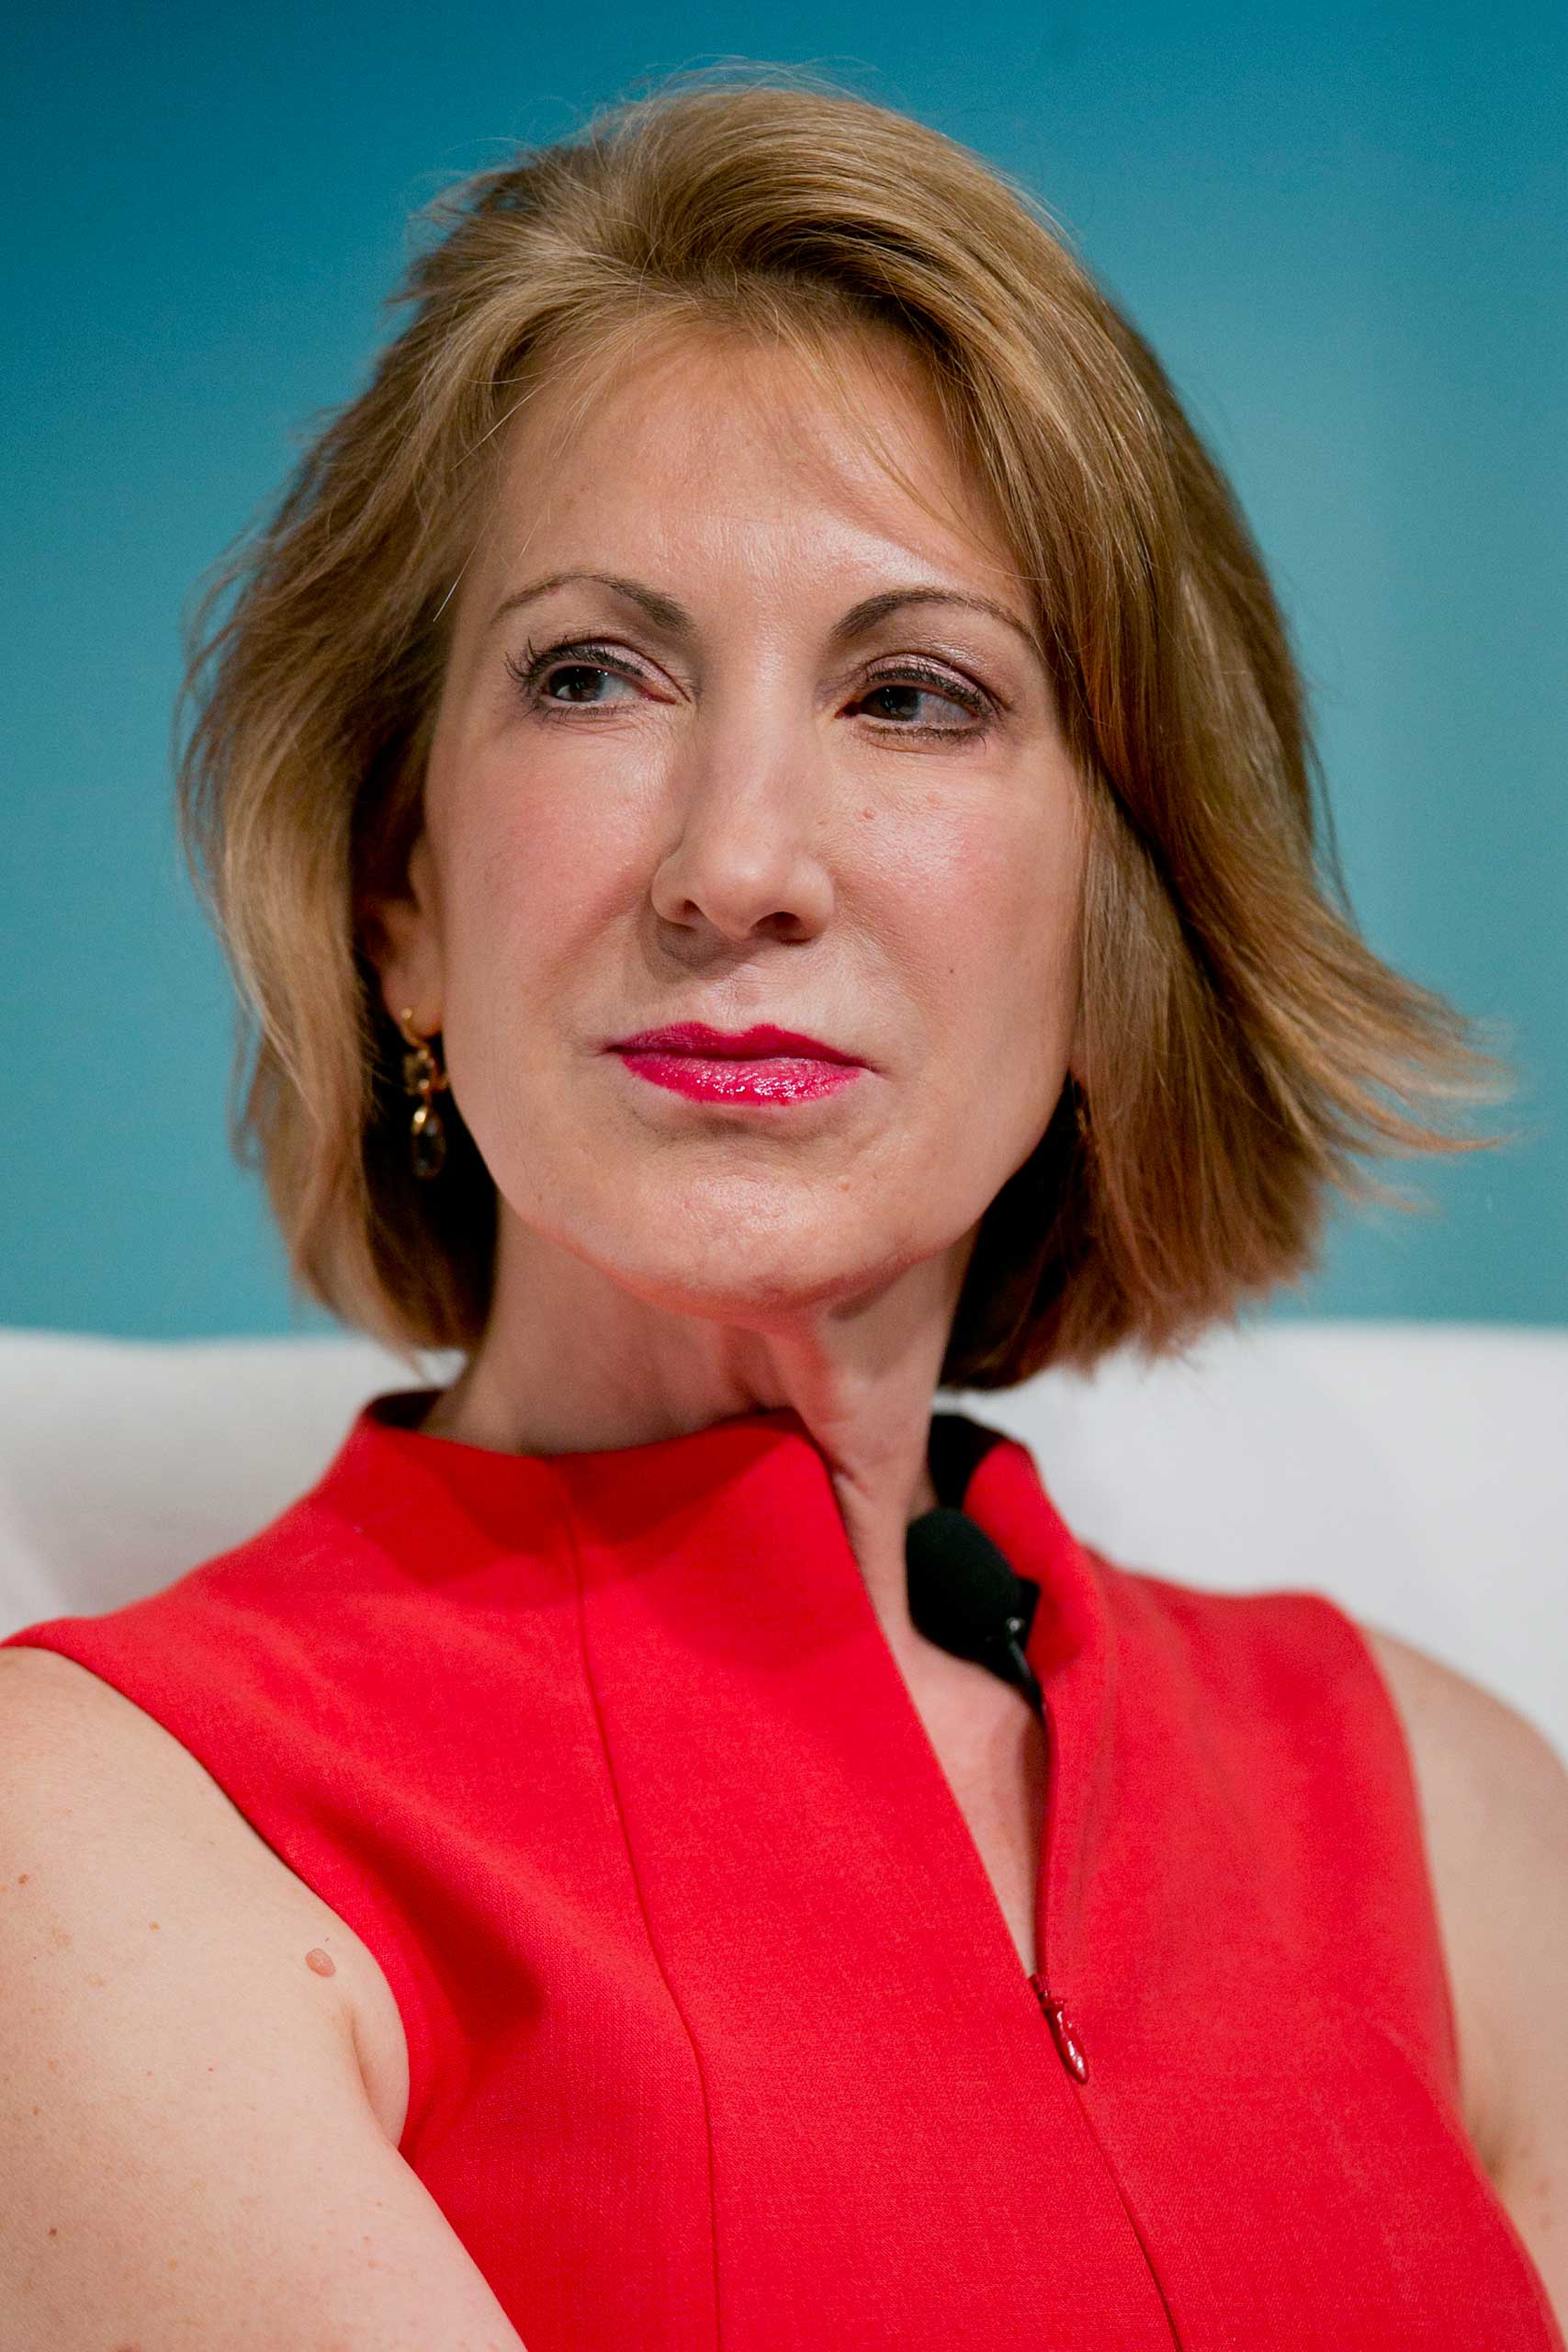 Carly Fiorina is the former CEO of Hewlitt-Packard and ran unsuccessfully for a Republican Senate seat from California in 2010. (Andrew Harrer—Bloomberg/Getty Images)